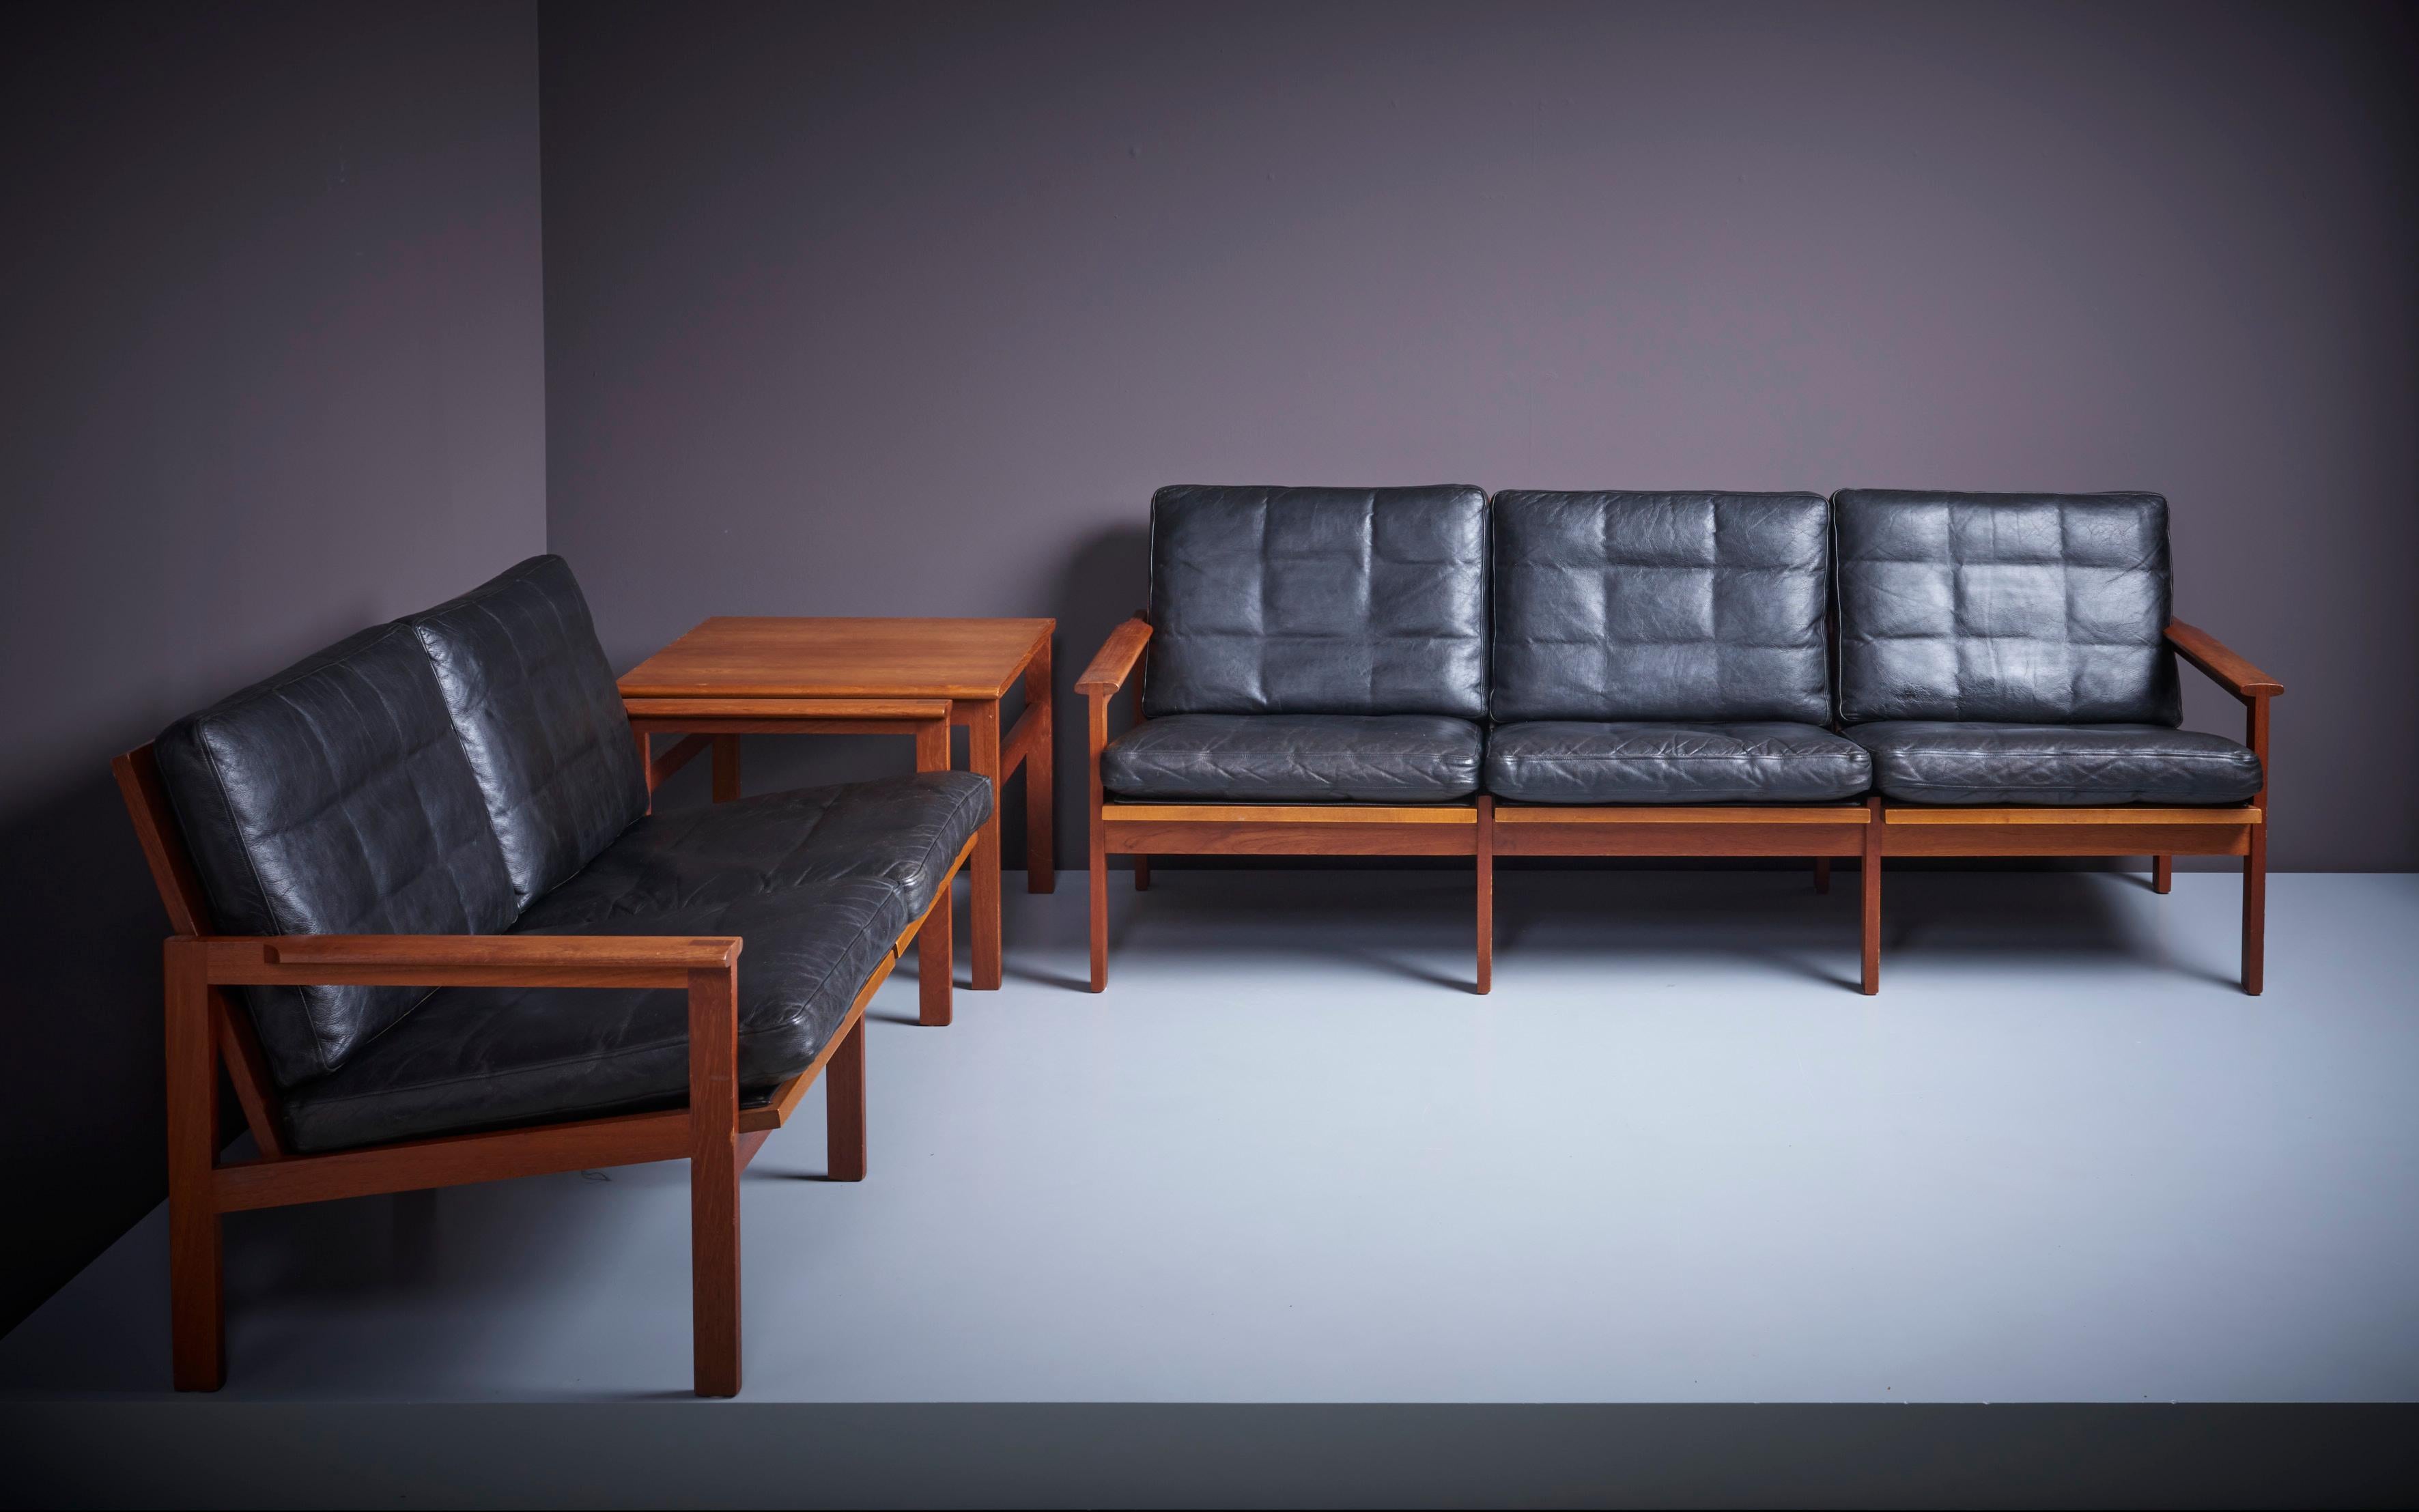 Original condition 'Capella' Set consisting of one 2 -seater sofa, one 3-seater sofa and a side table by Danish furniture designer Kristian Illum Wikkelsø (1919-1999) for Niels Eilersen. Outstanding quality with solid teak frames and beautiful black